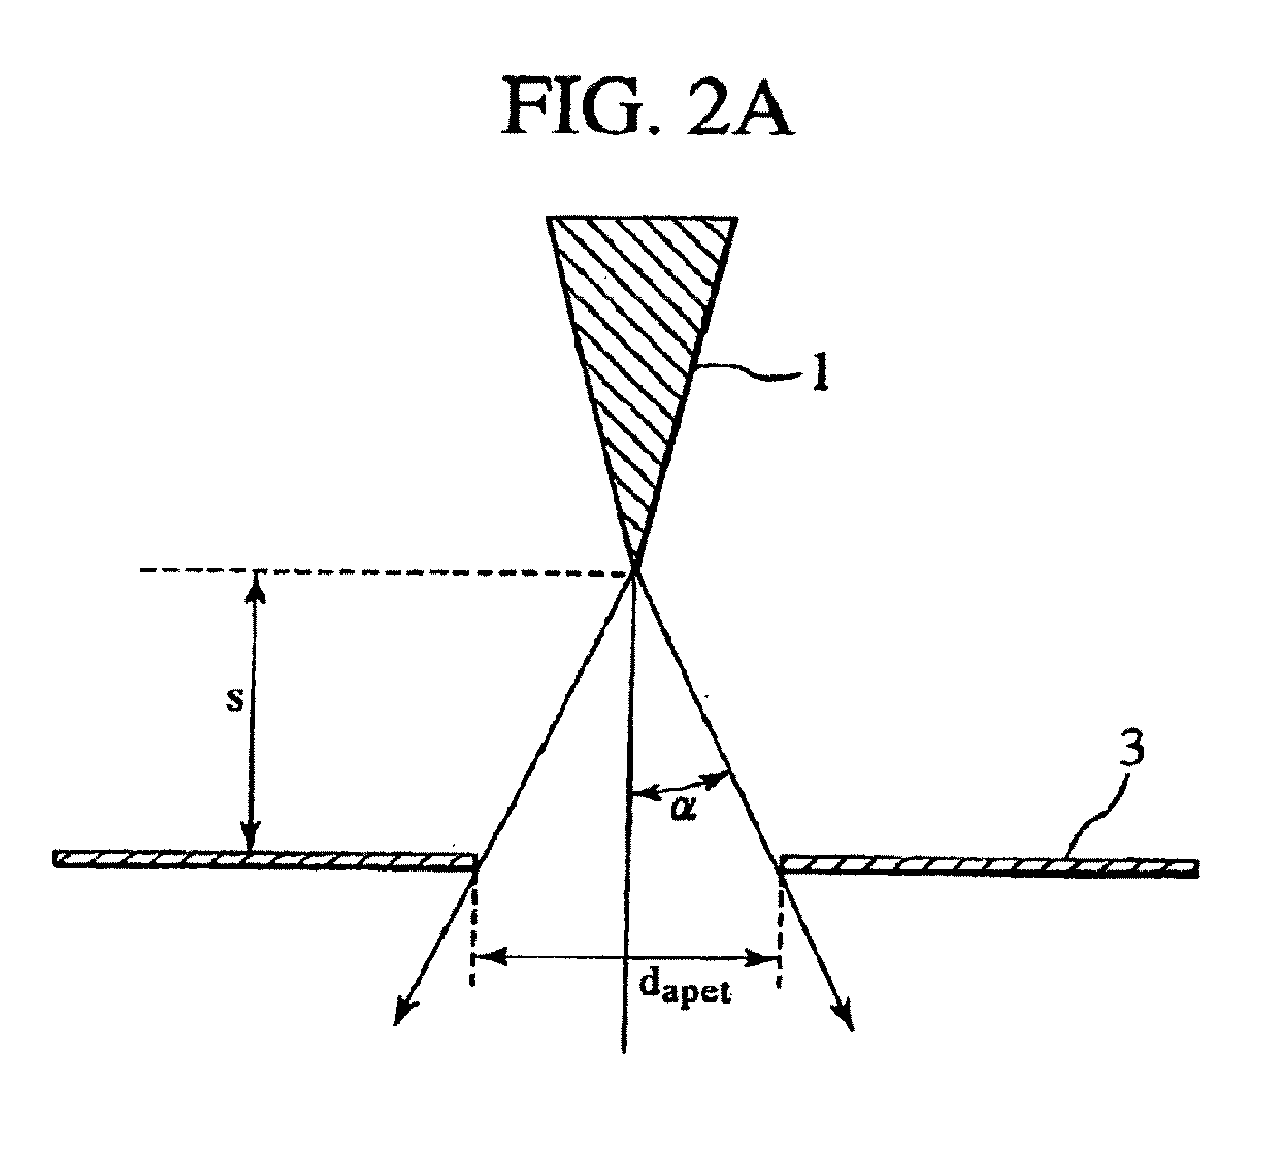 Gas field ionization ion source, scanning charged particle microscope, optical axis adjustment method and specimen observation method